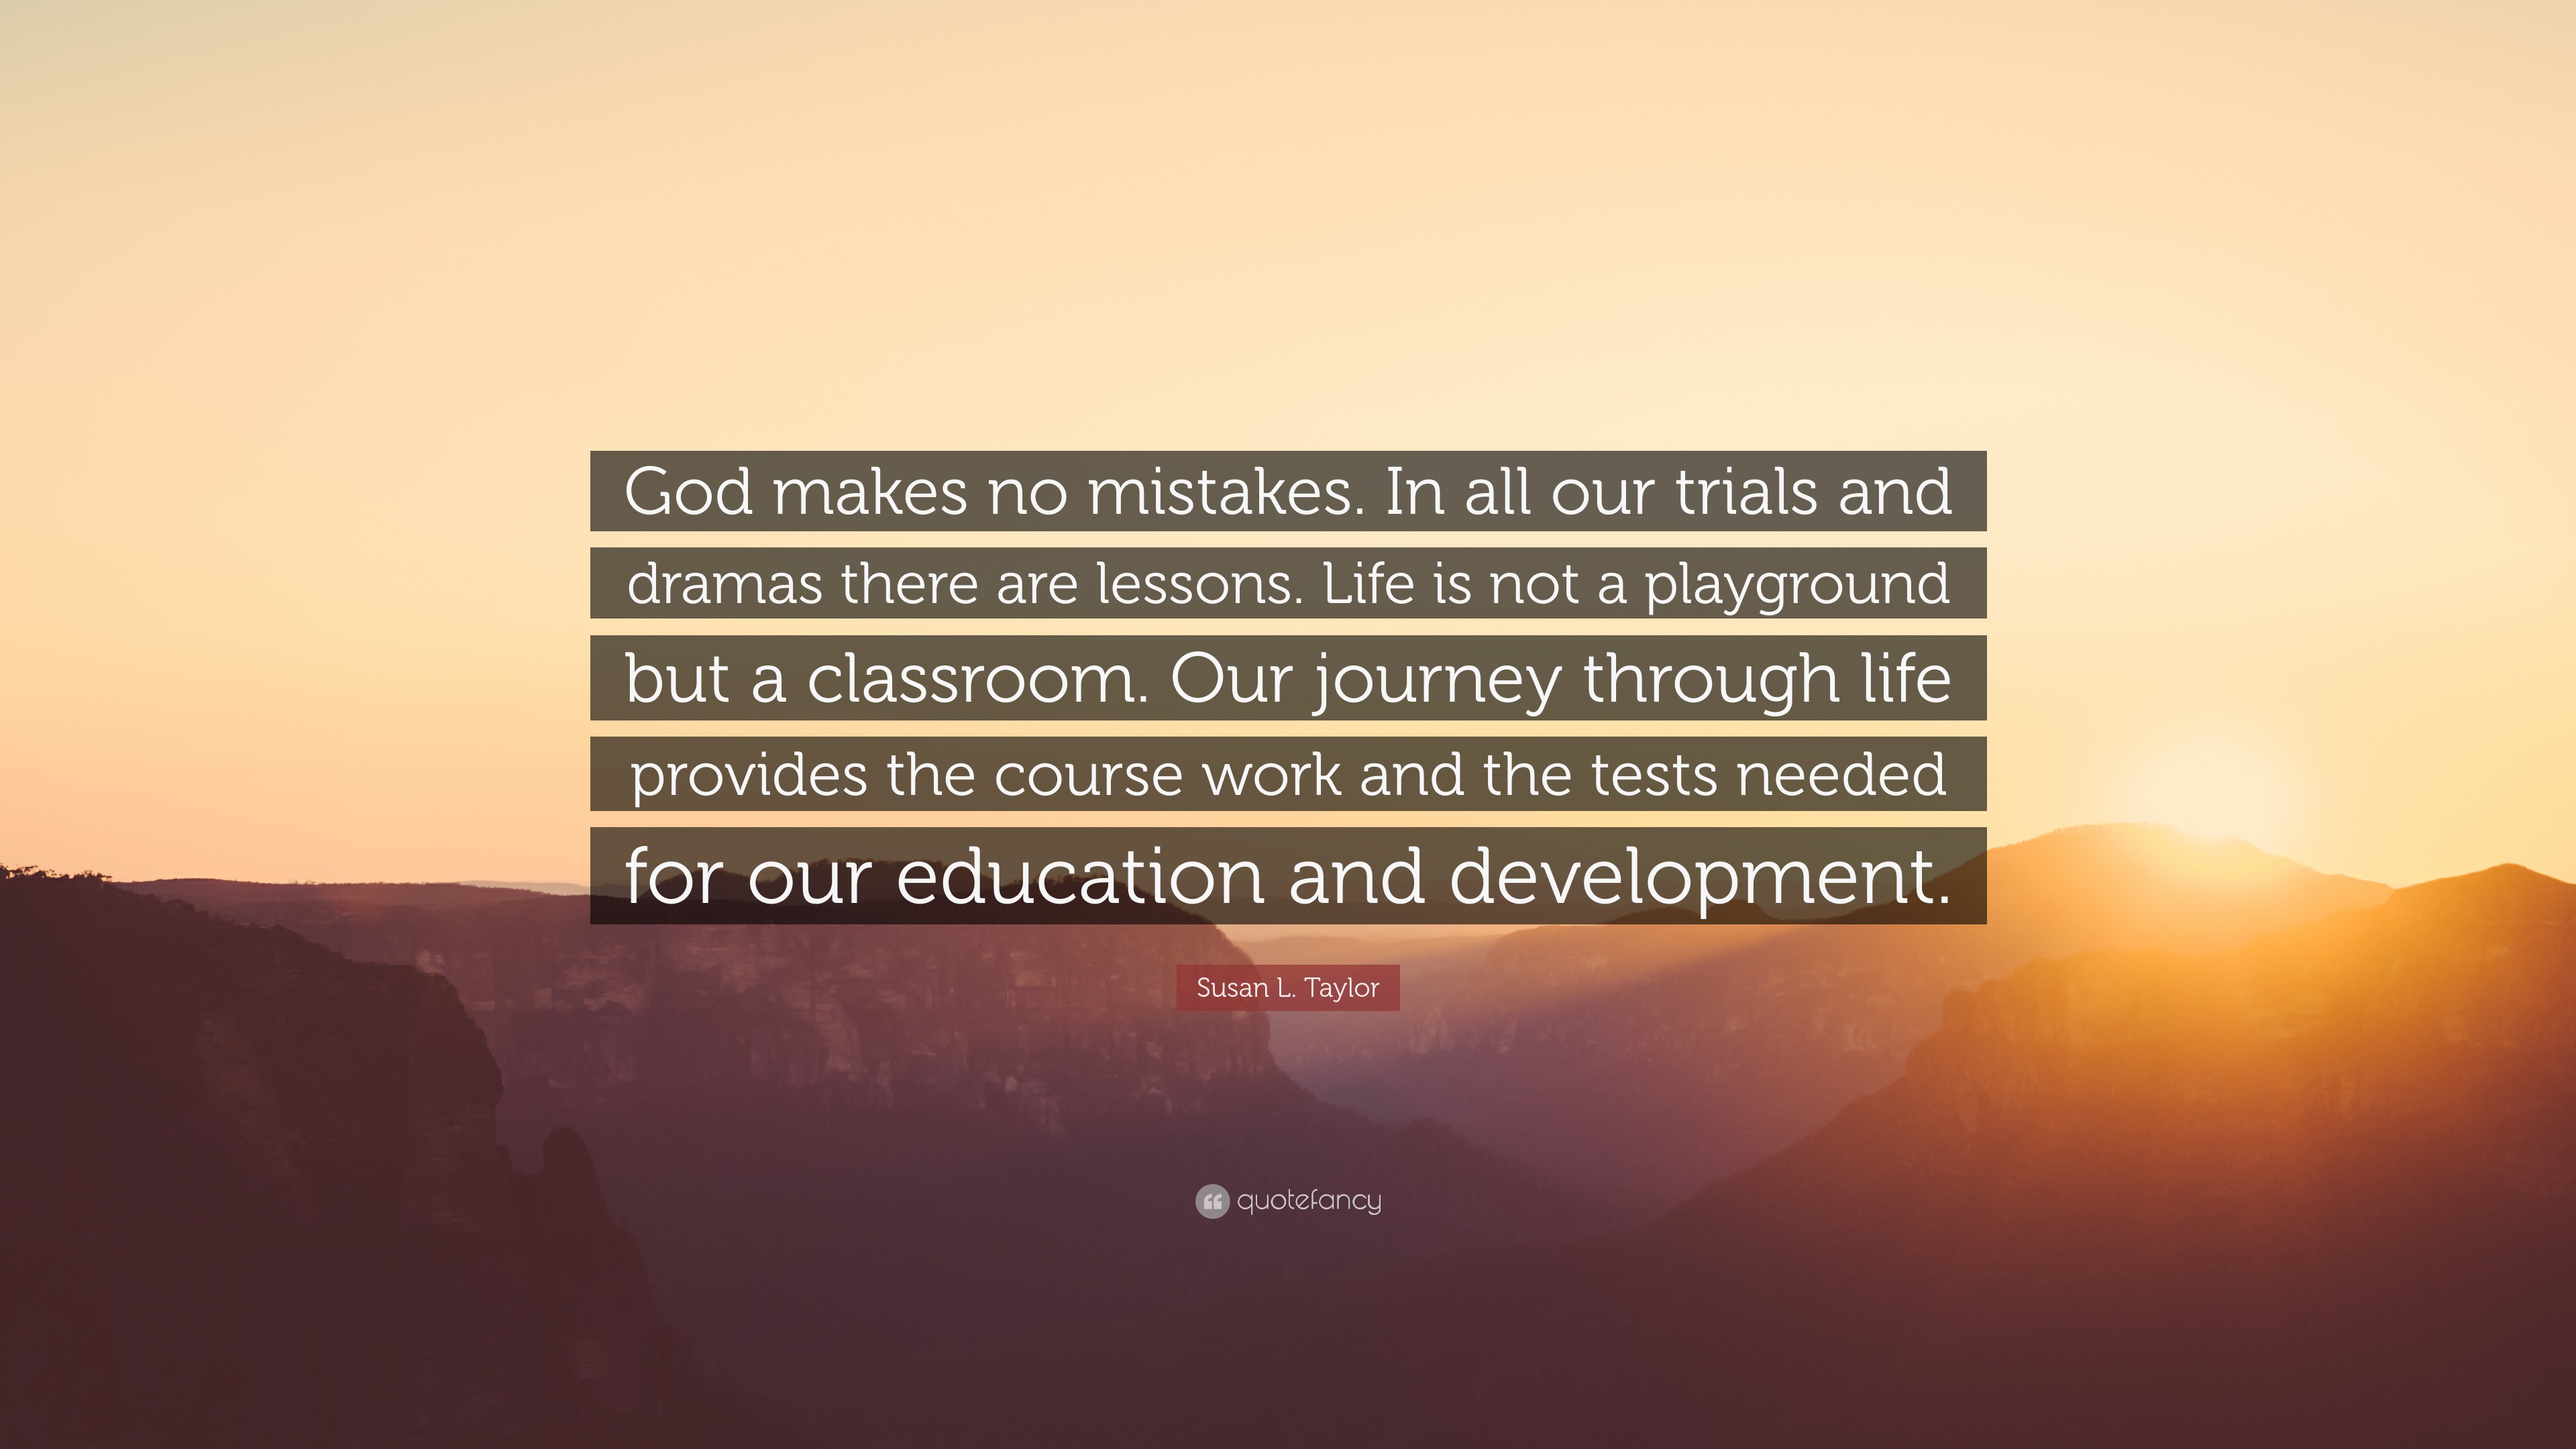 Susan L Taylor Quote “God makes no mistakes In all our trials